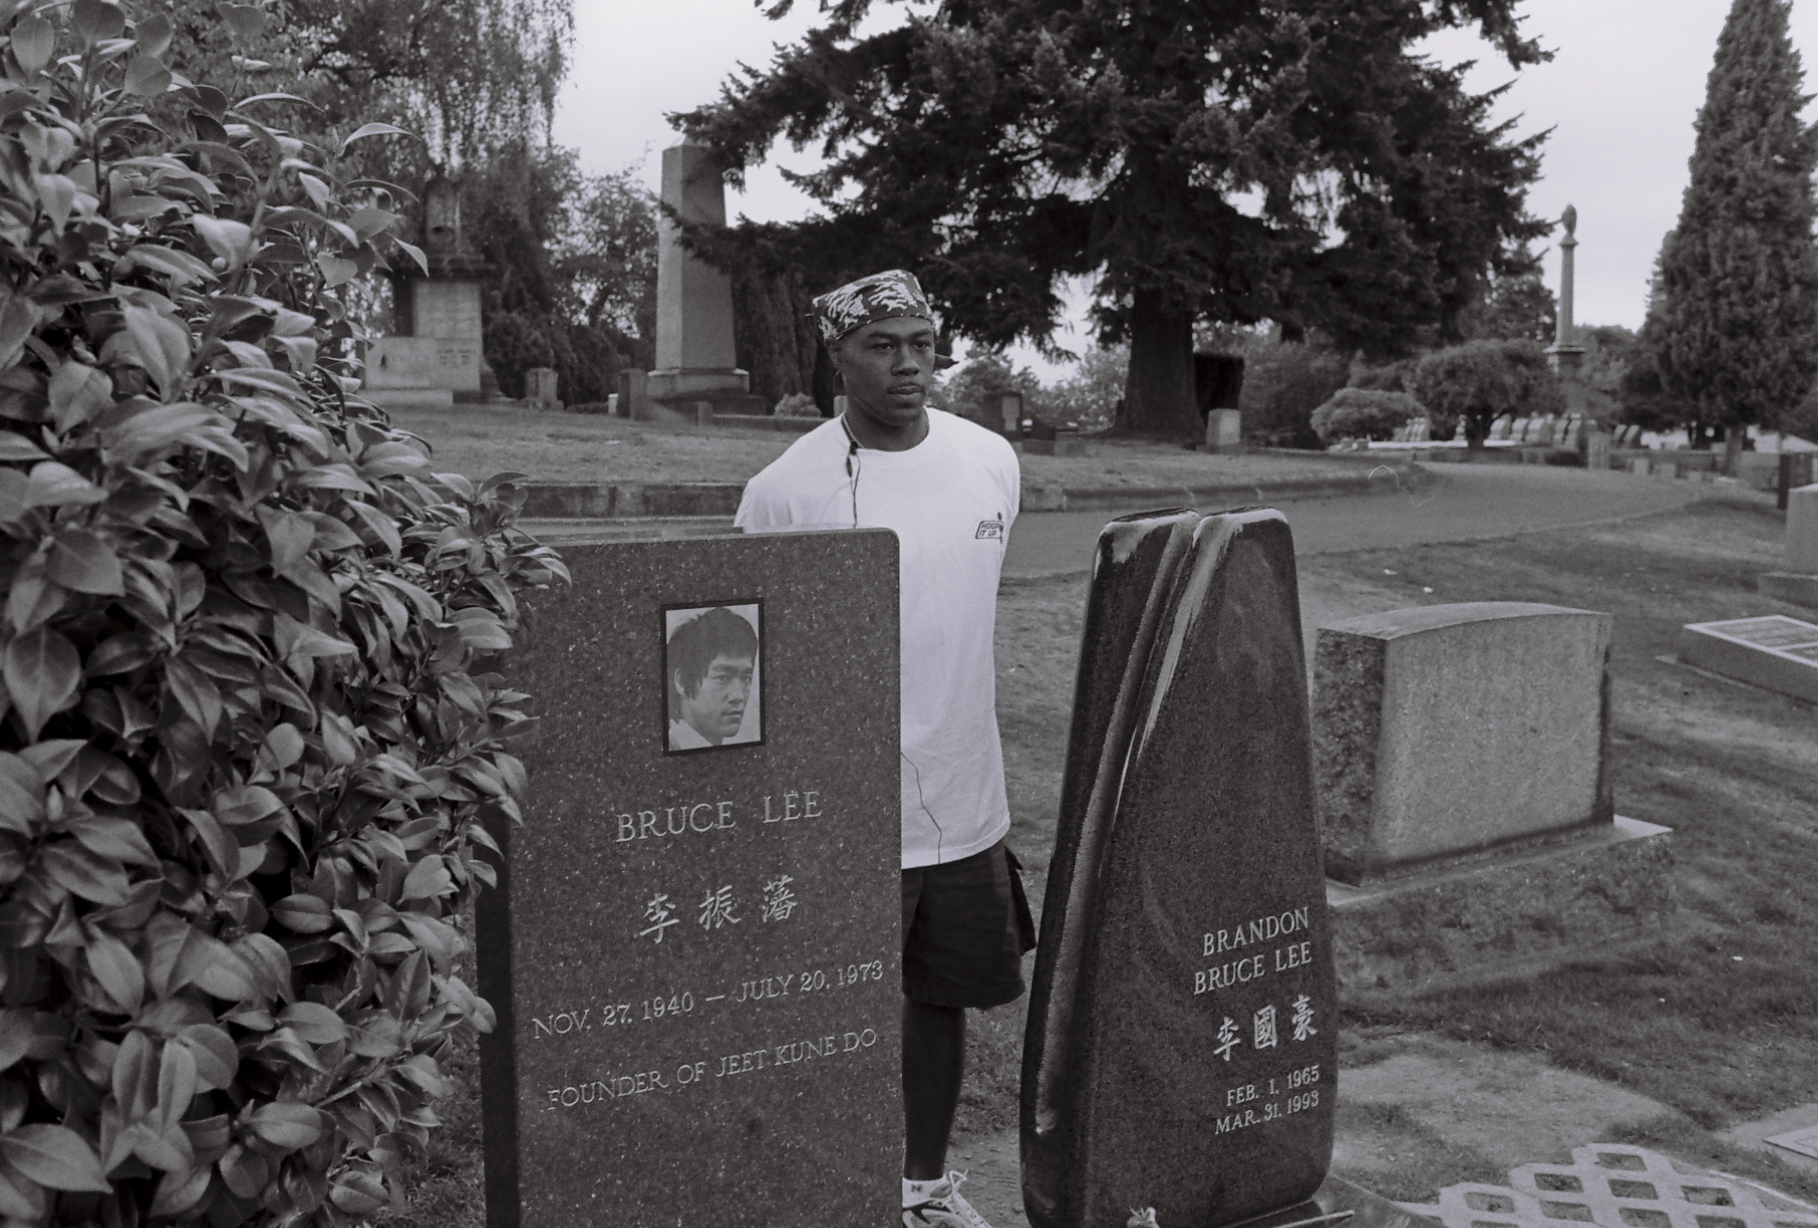 Black-and-white photograph of a dark-skinned young man wearing a white t-shirt and a bandanna, standing between two headstones that read "Bruce Lee" (on the left) and "Brandon Bruce Lee" (on the right).